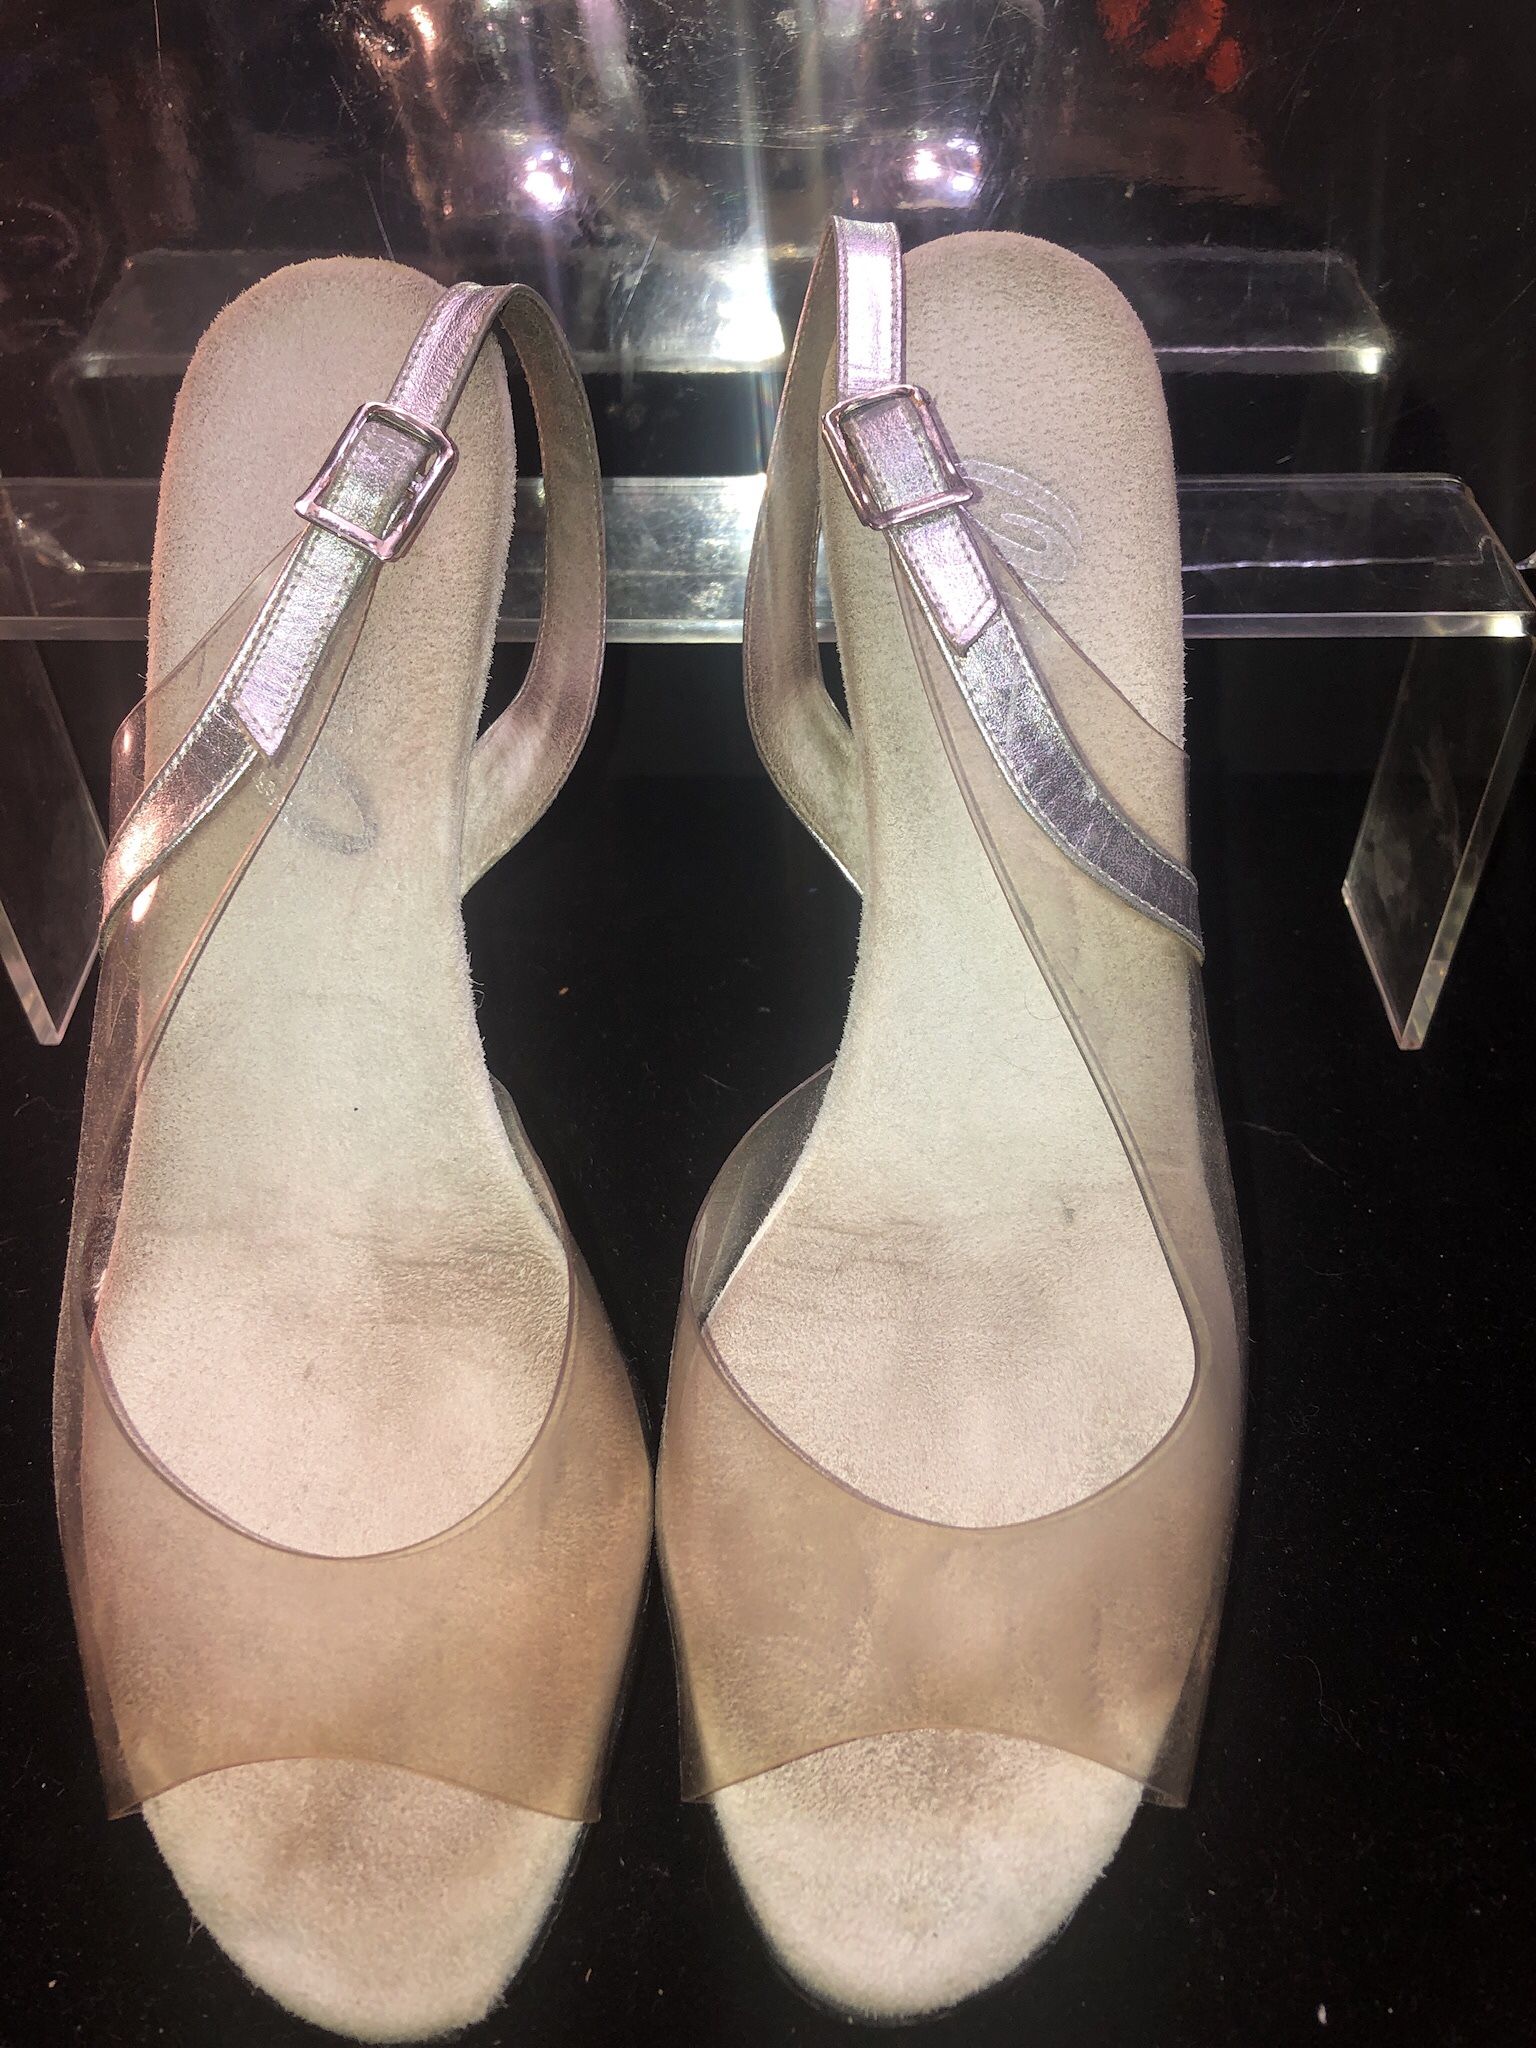 ONEX-CLEAR SANDAL WITH LOW SILVER WEDGE HEEL  (HOT HOT HOT!) SIZE 8